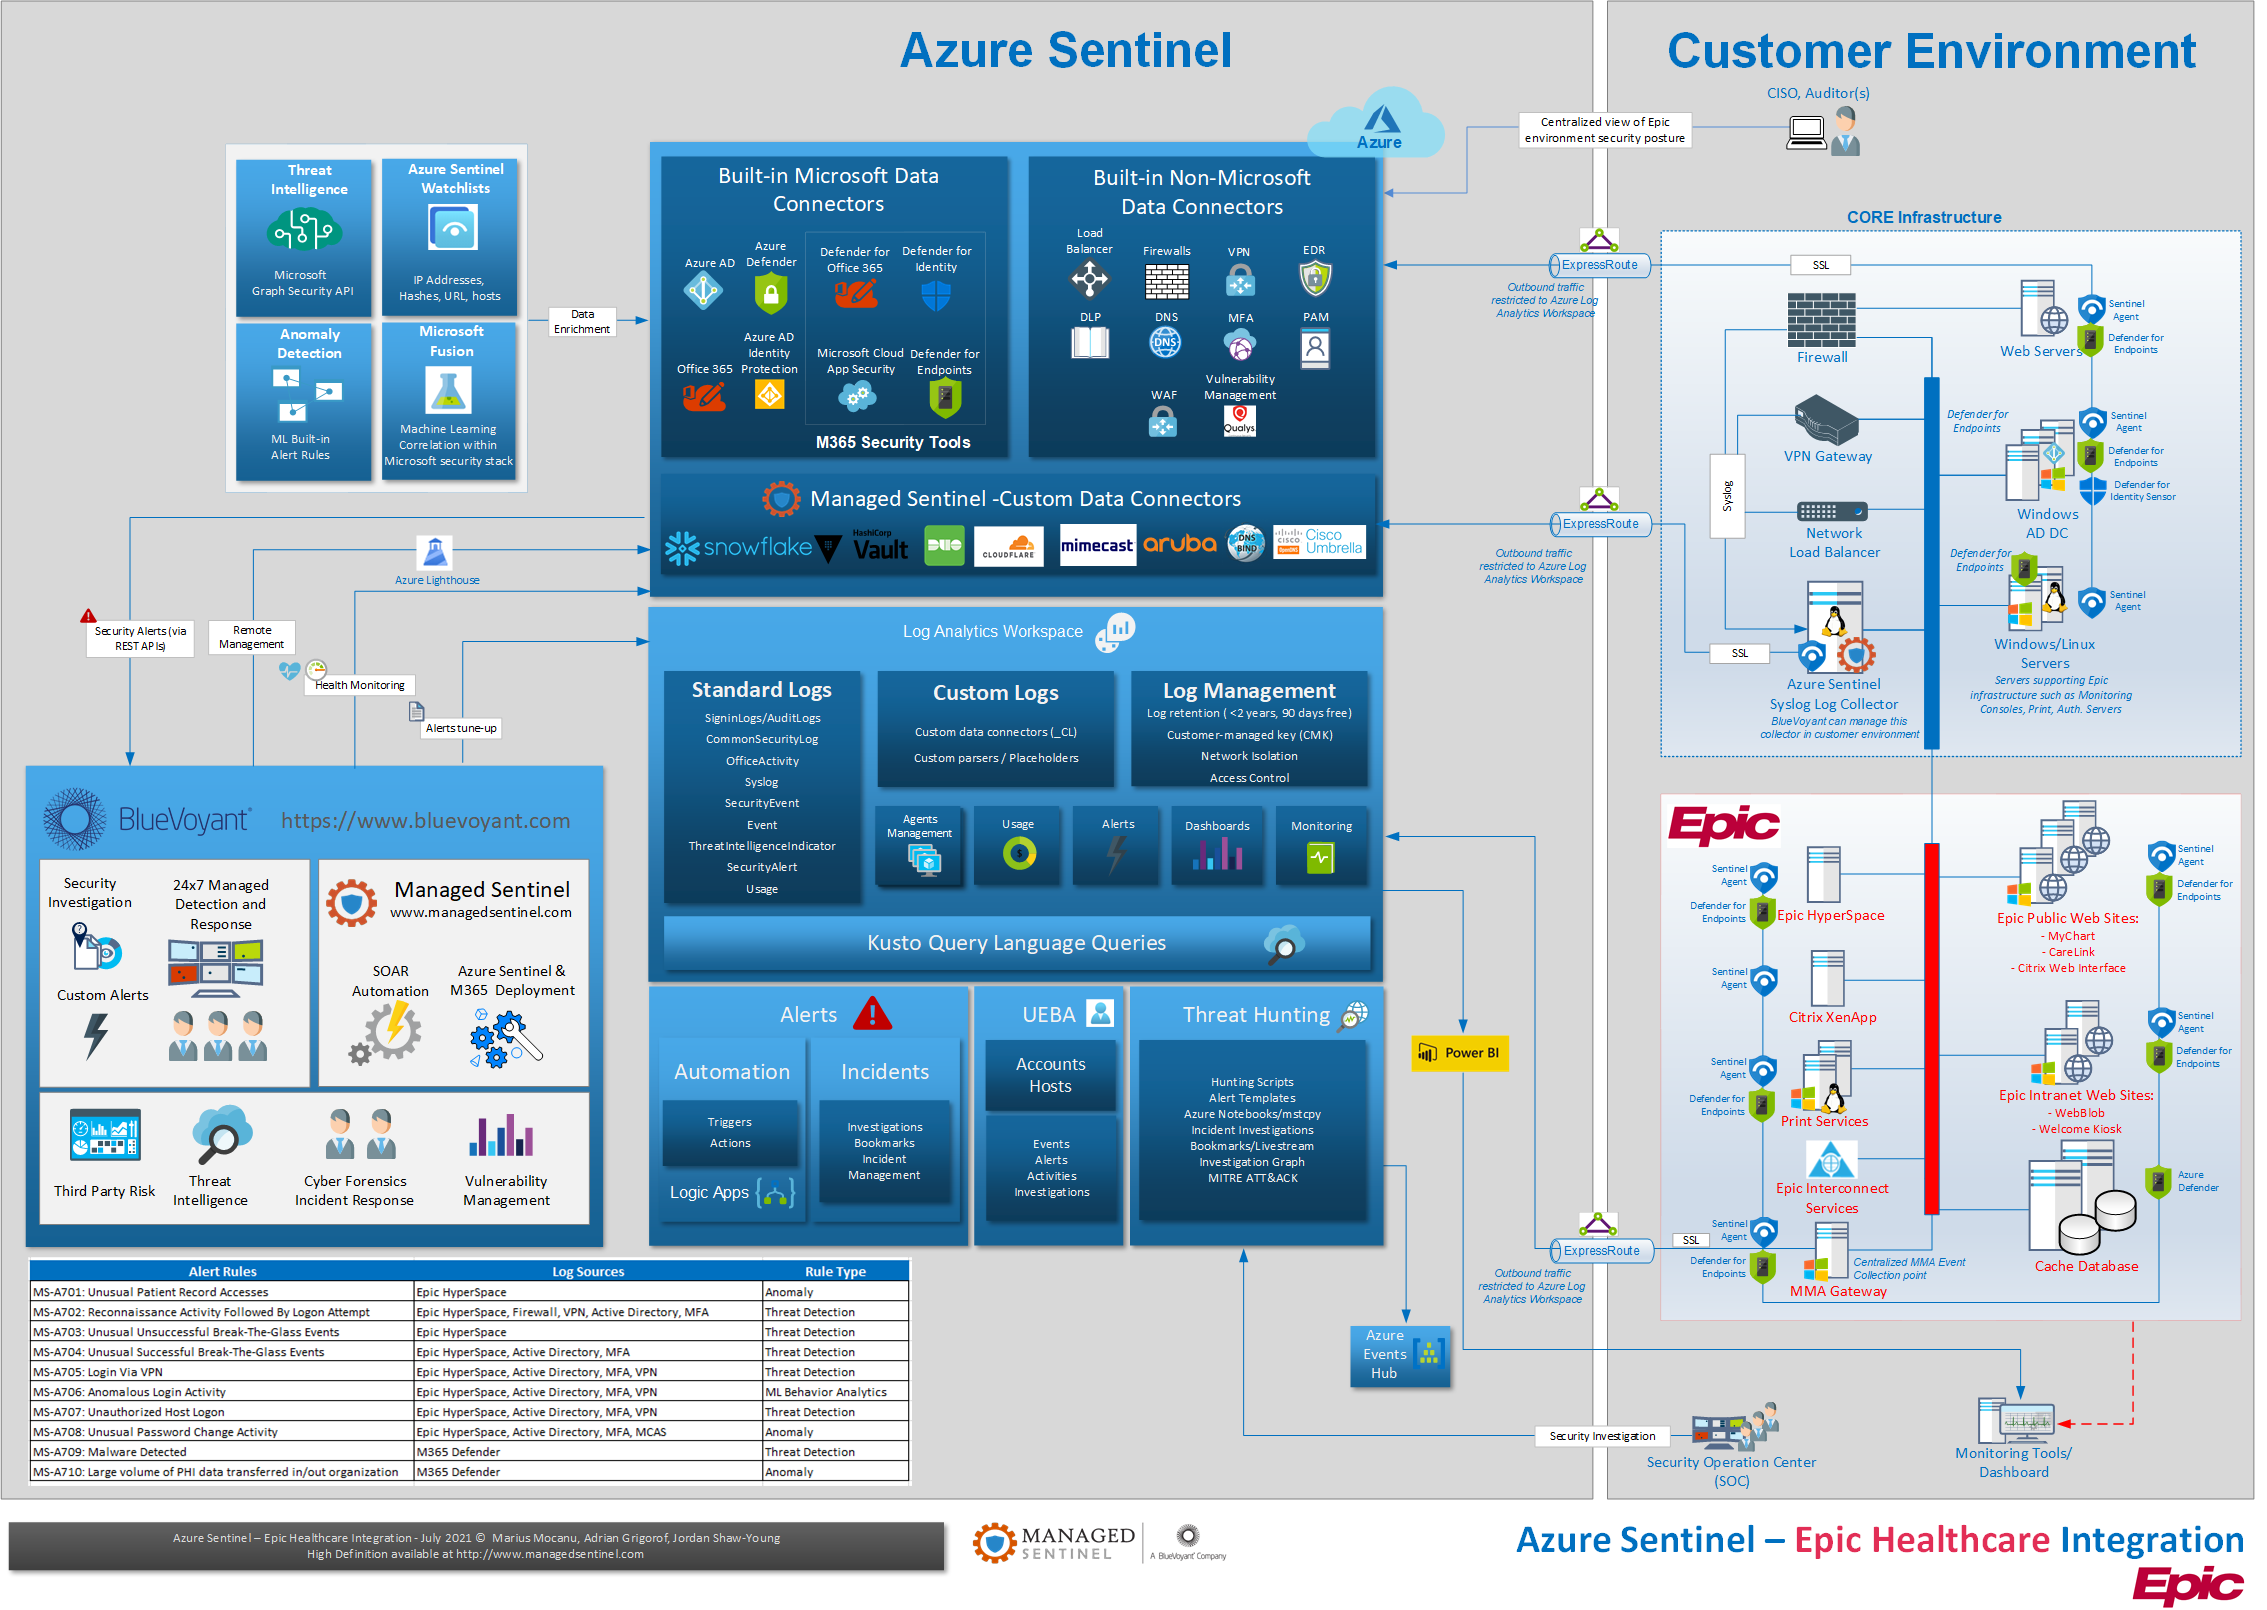 difference between azure sentinel and azure security center